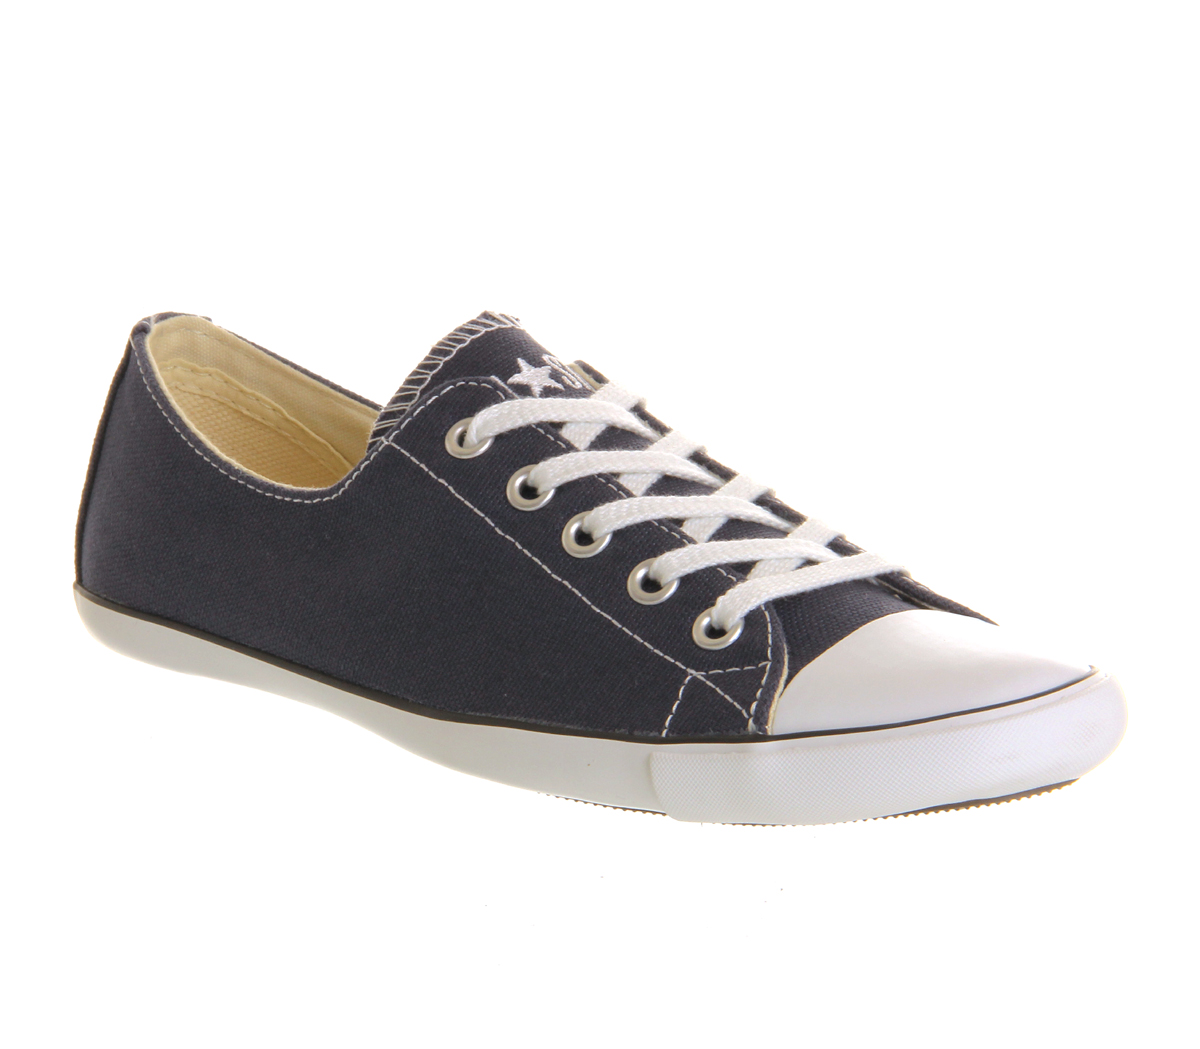 converse ct lite ox for Men, Kids & Lifestyle|Free Delivery & Returns! -